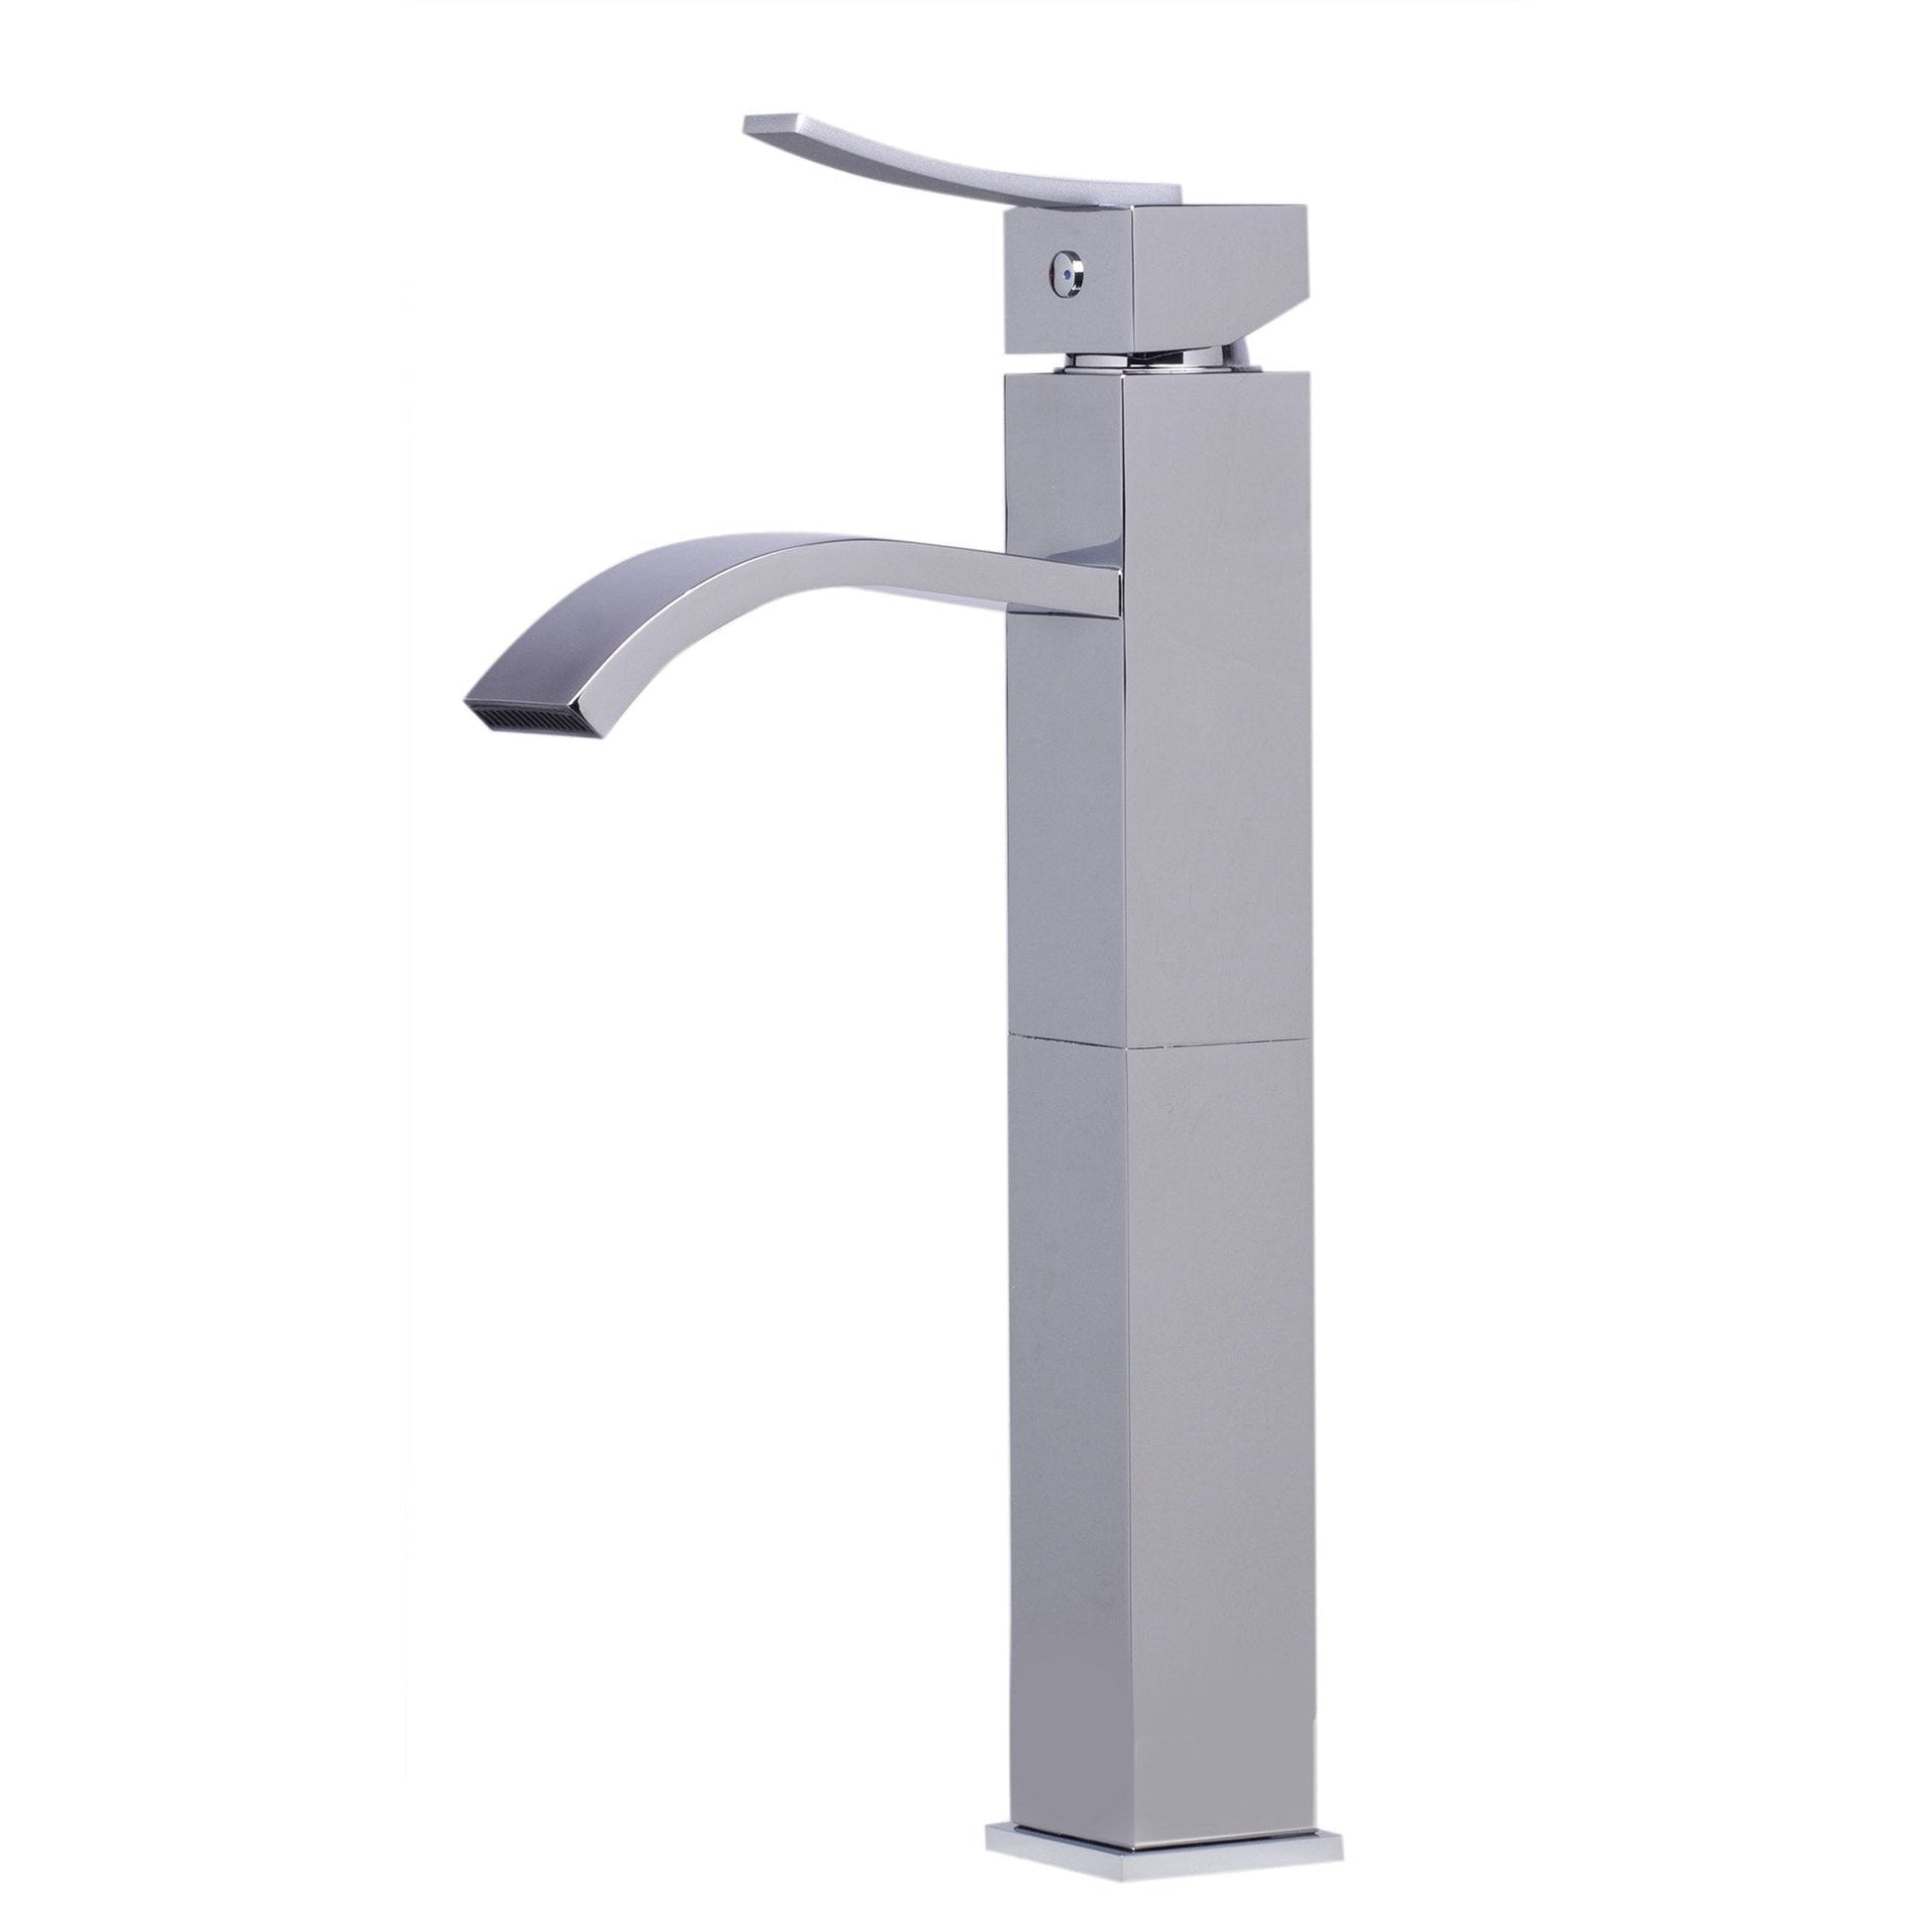 ALFI Brand AB1158-PC Polished Chrome Vessel Square Body Curved Spout Brass Bathroom Sink Faucet With Single Lever